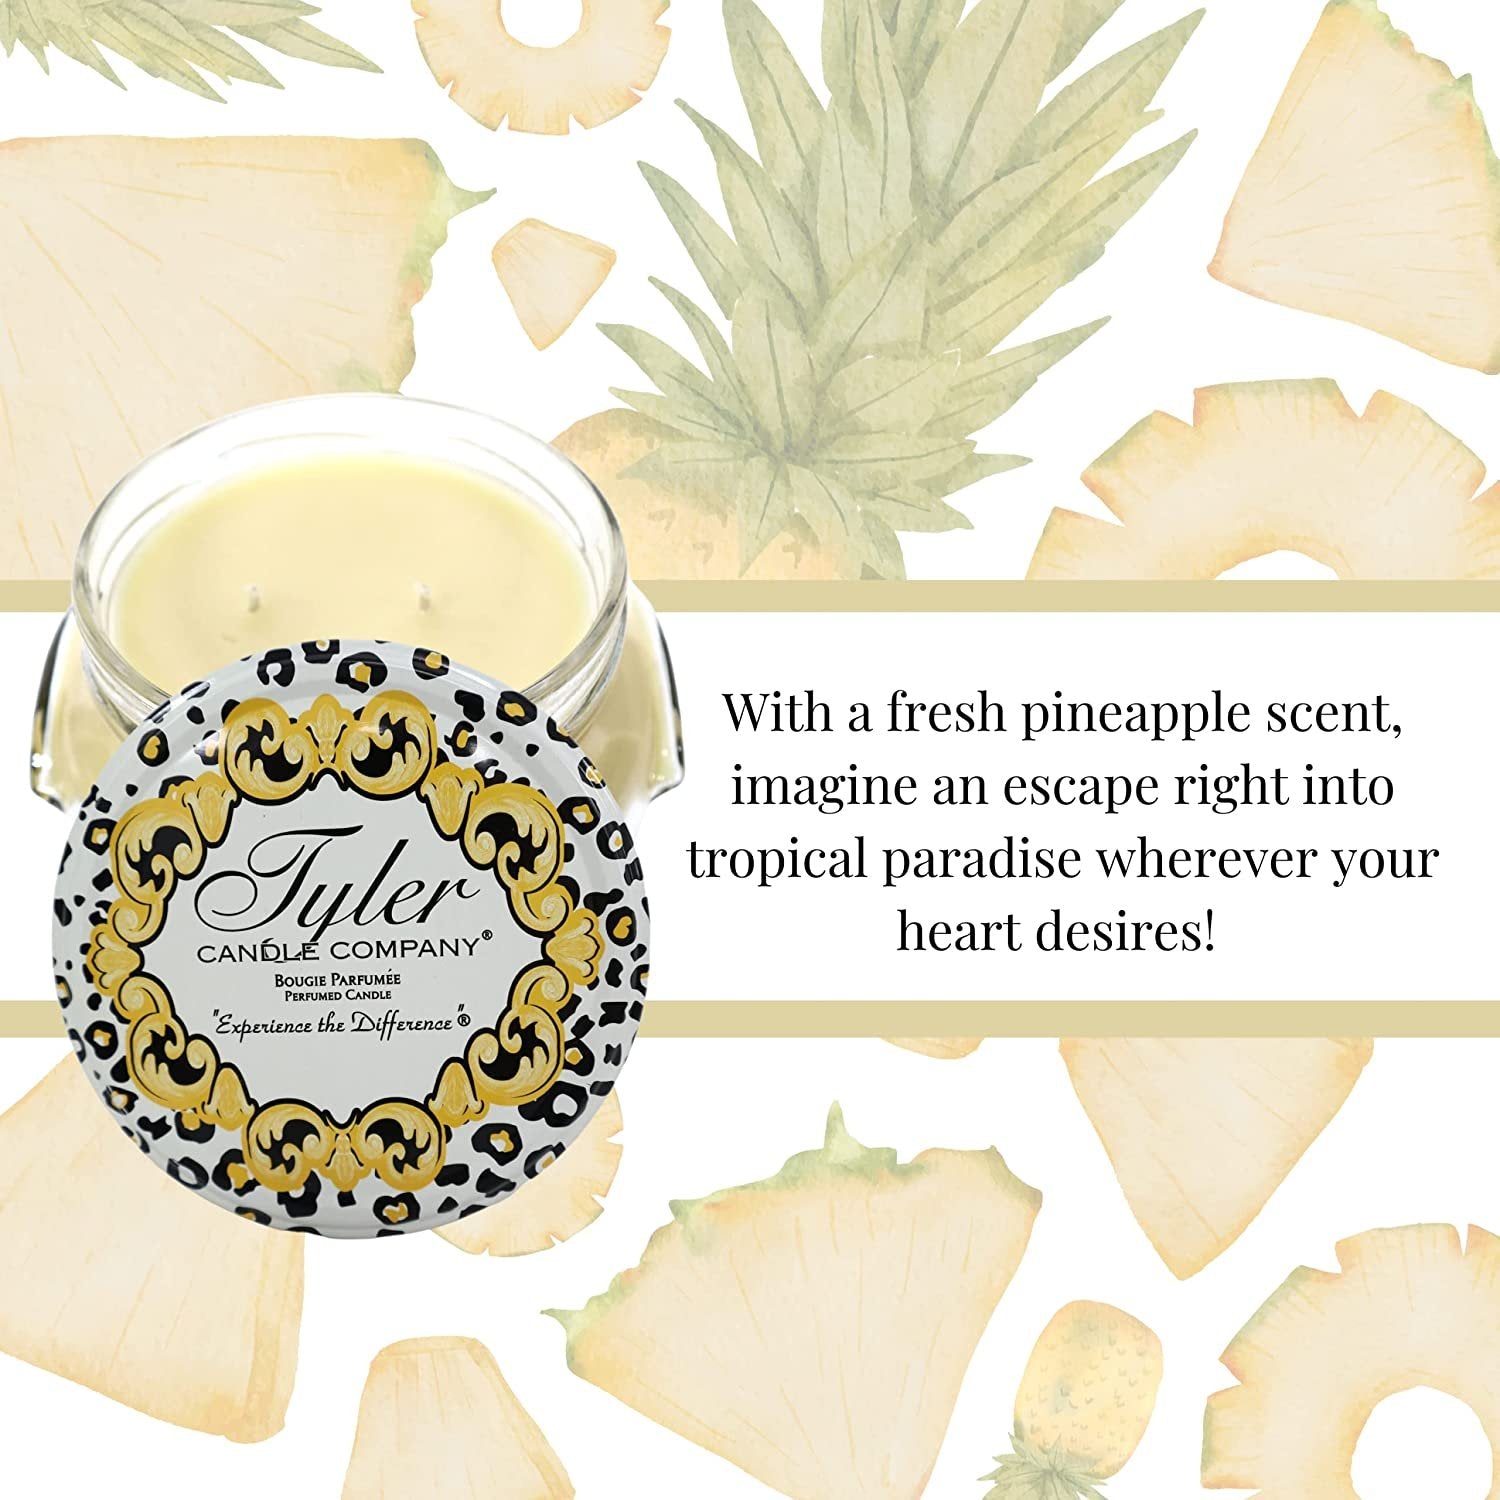 Tyler Candle Company Pineapple Crush Scent Jar Candle - Luxurious Scented Candle with Essential Oils - Long Burning Candles 110-120 Hours - Large Candle 22 oz with Bonus Key Chain